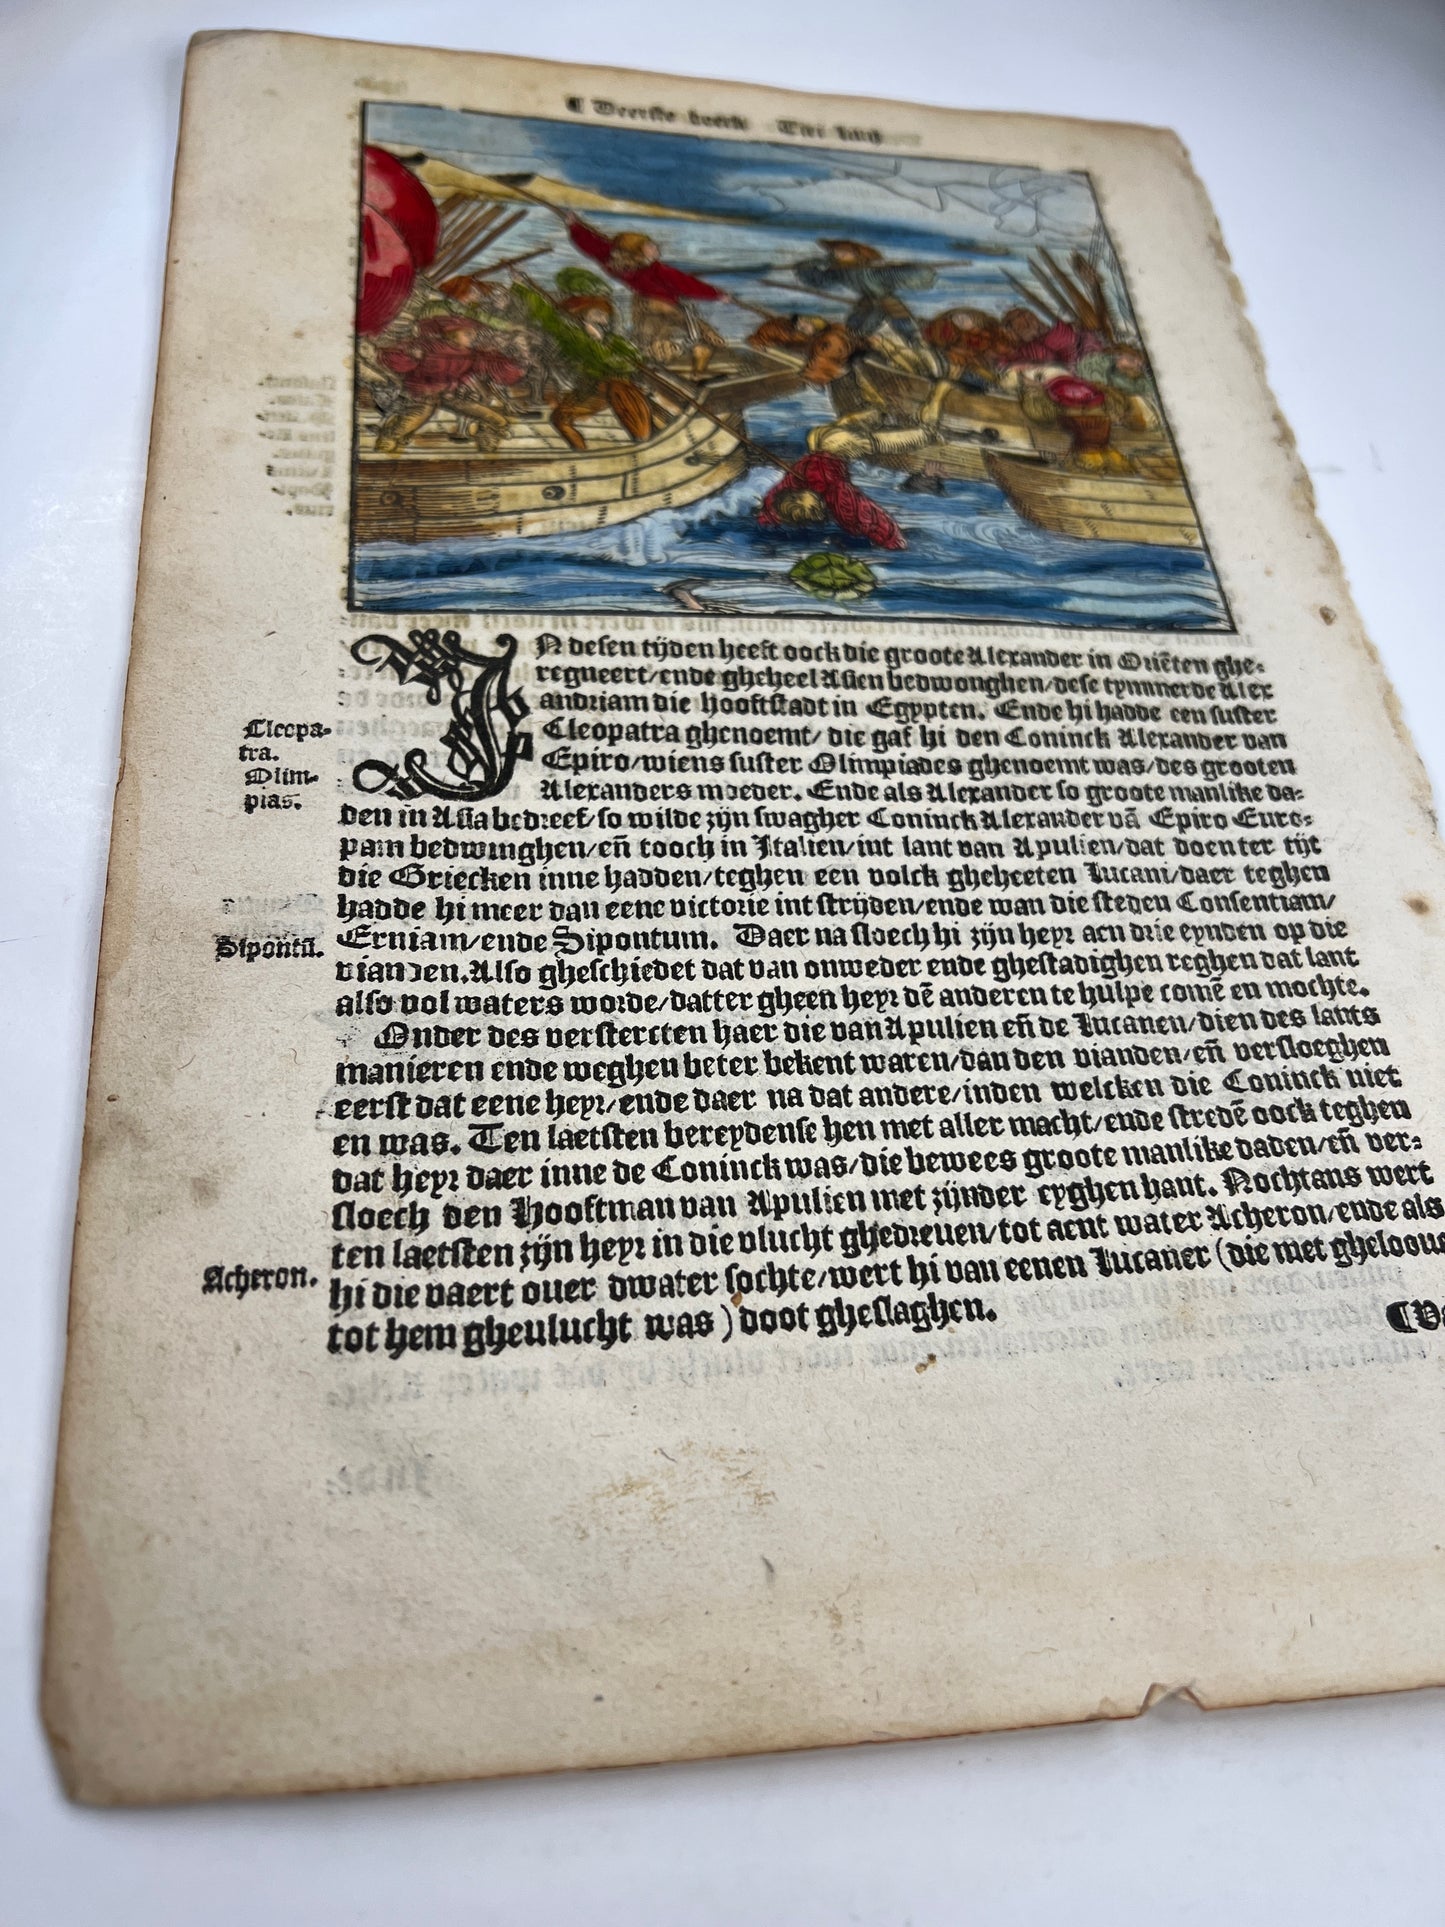 1541 Folio Leaf with 2 Woodcuts: Livy's History of Rome - Alexander the Great, Sea Battle with the Greeks